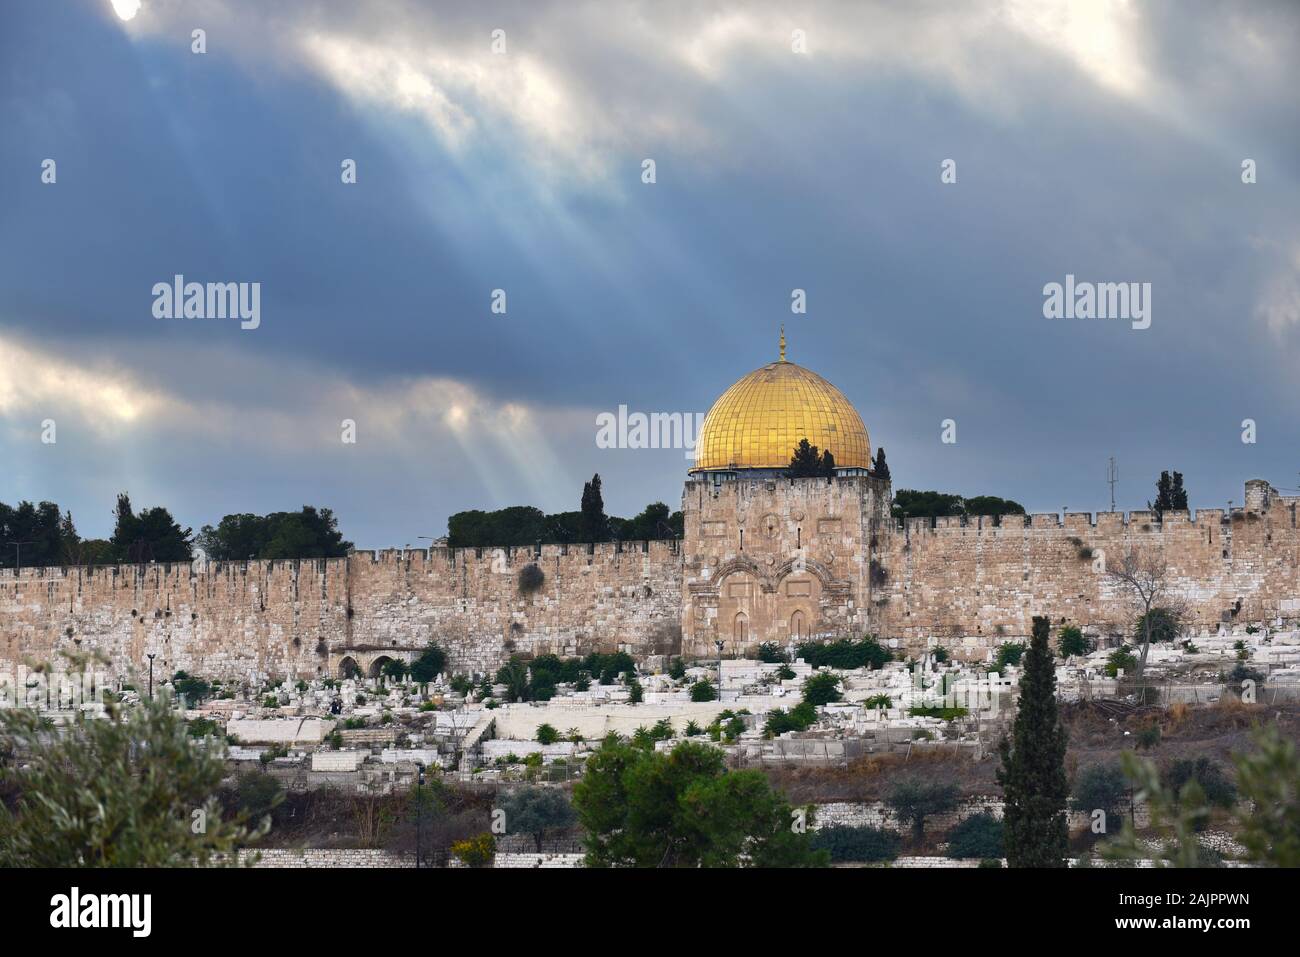 Golden Gate and Golden Dome two religieus holy Landmarks of Jerusalem captured in one image. Stock Photo